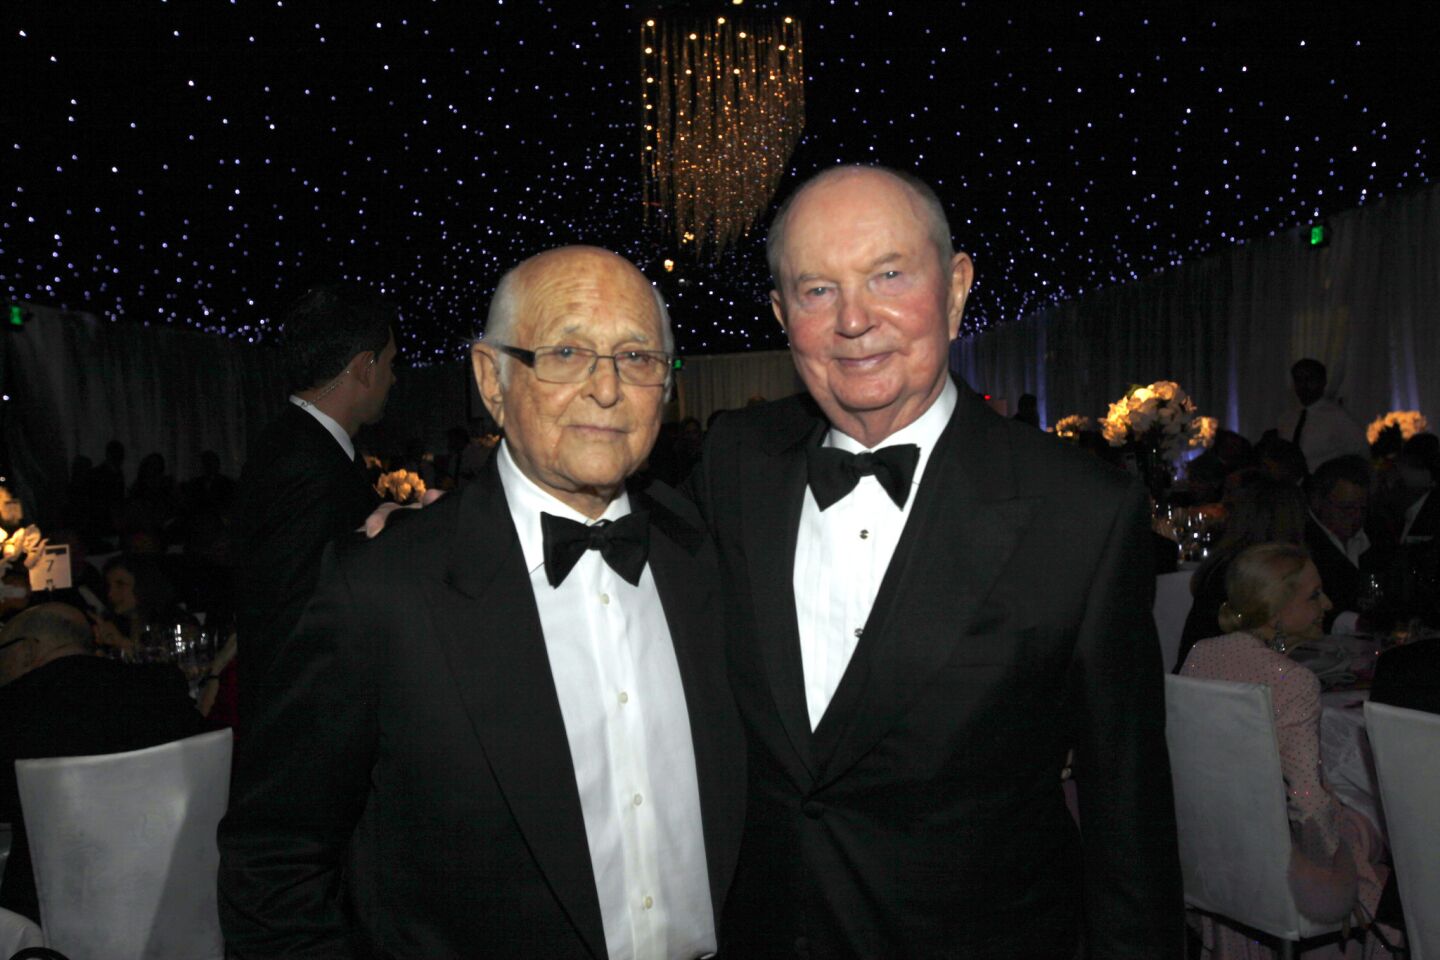 Television producer Norman Lear, left, and Jerry Perenchio at a Walt Disney Concert Hall gala in 2013.